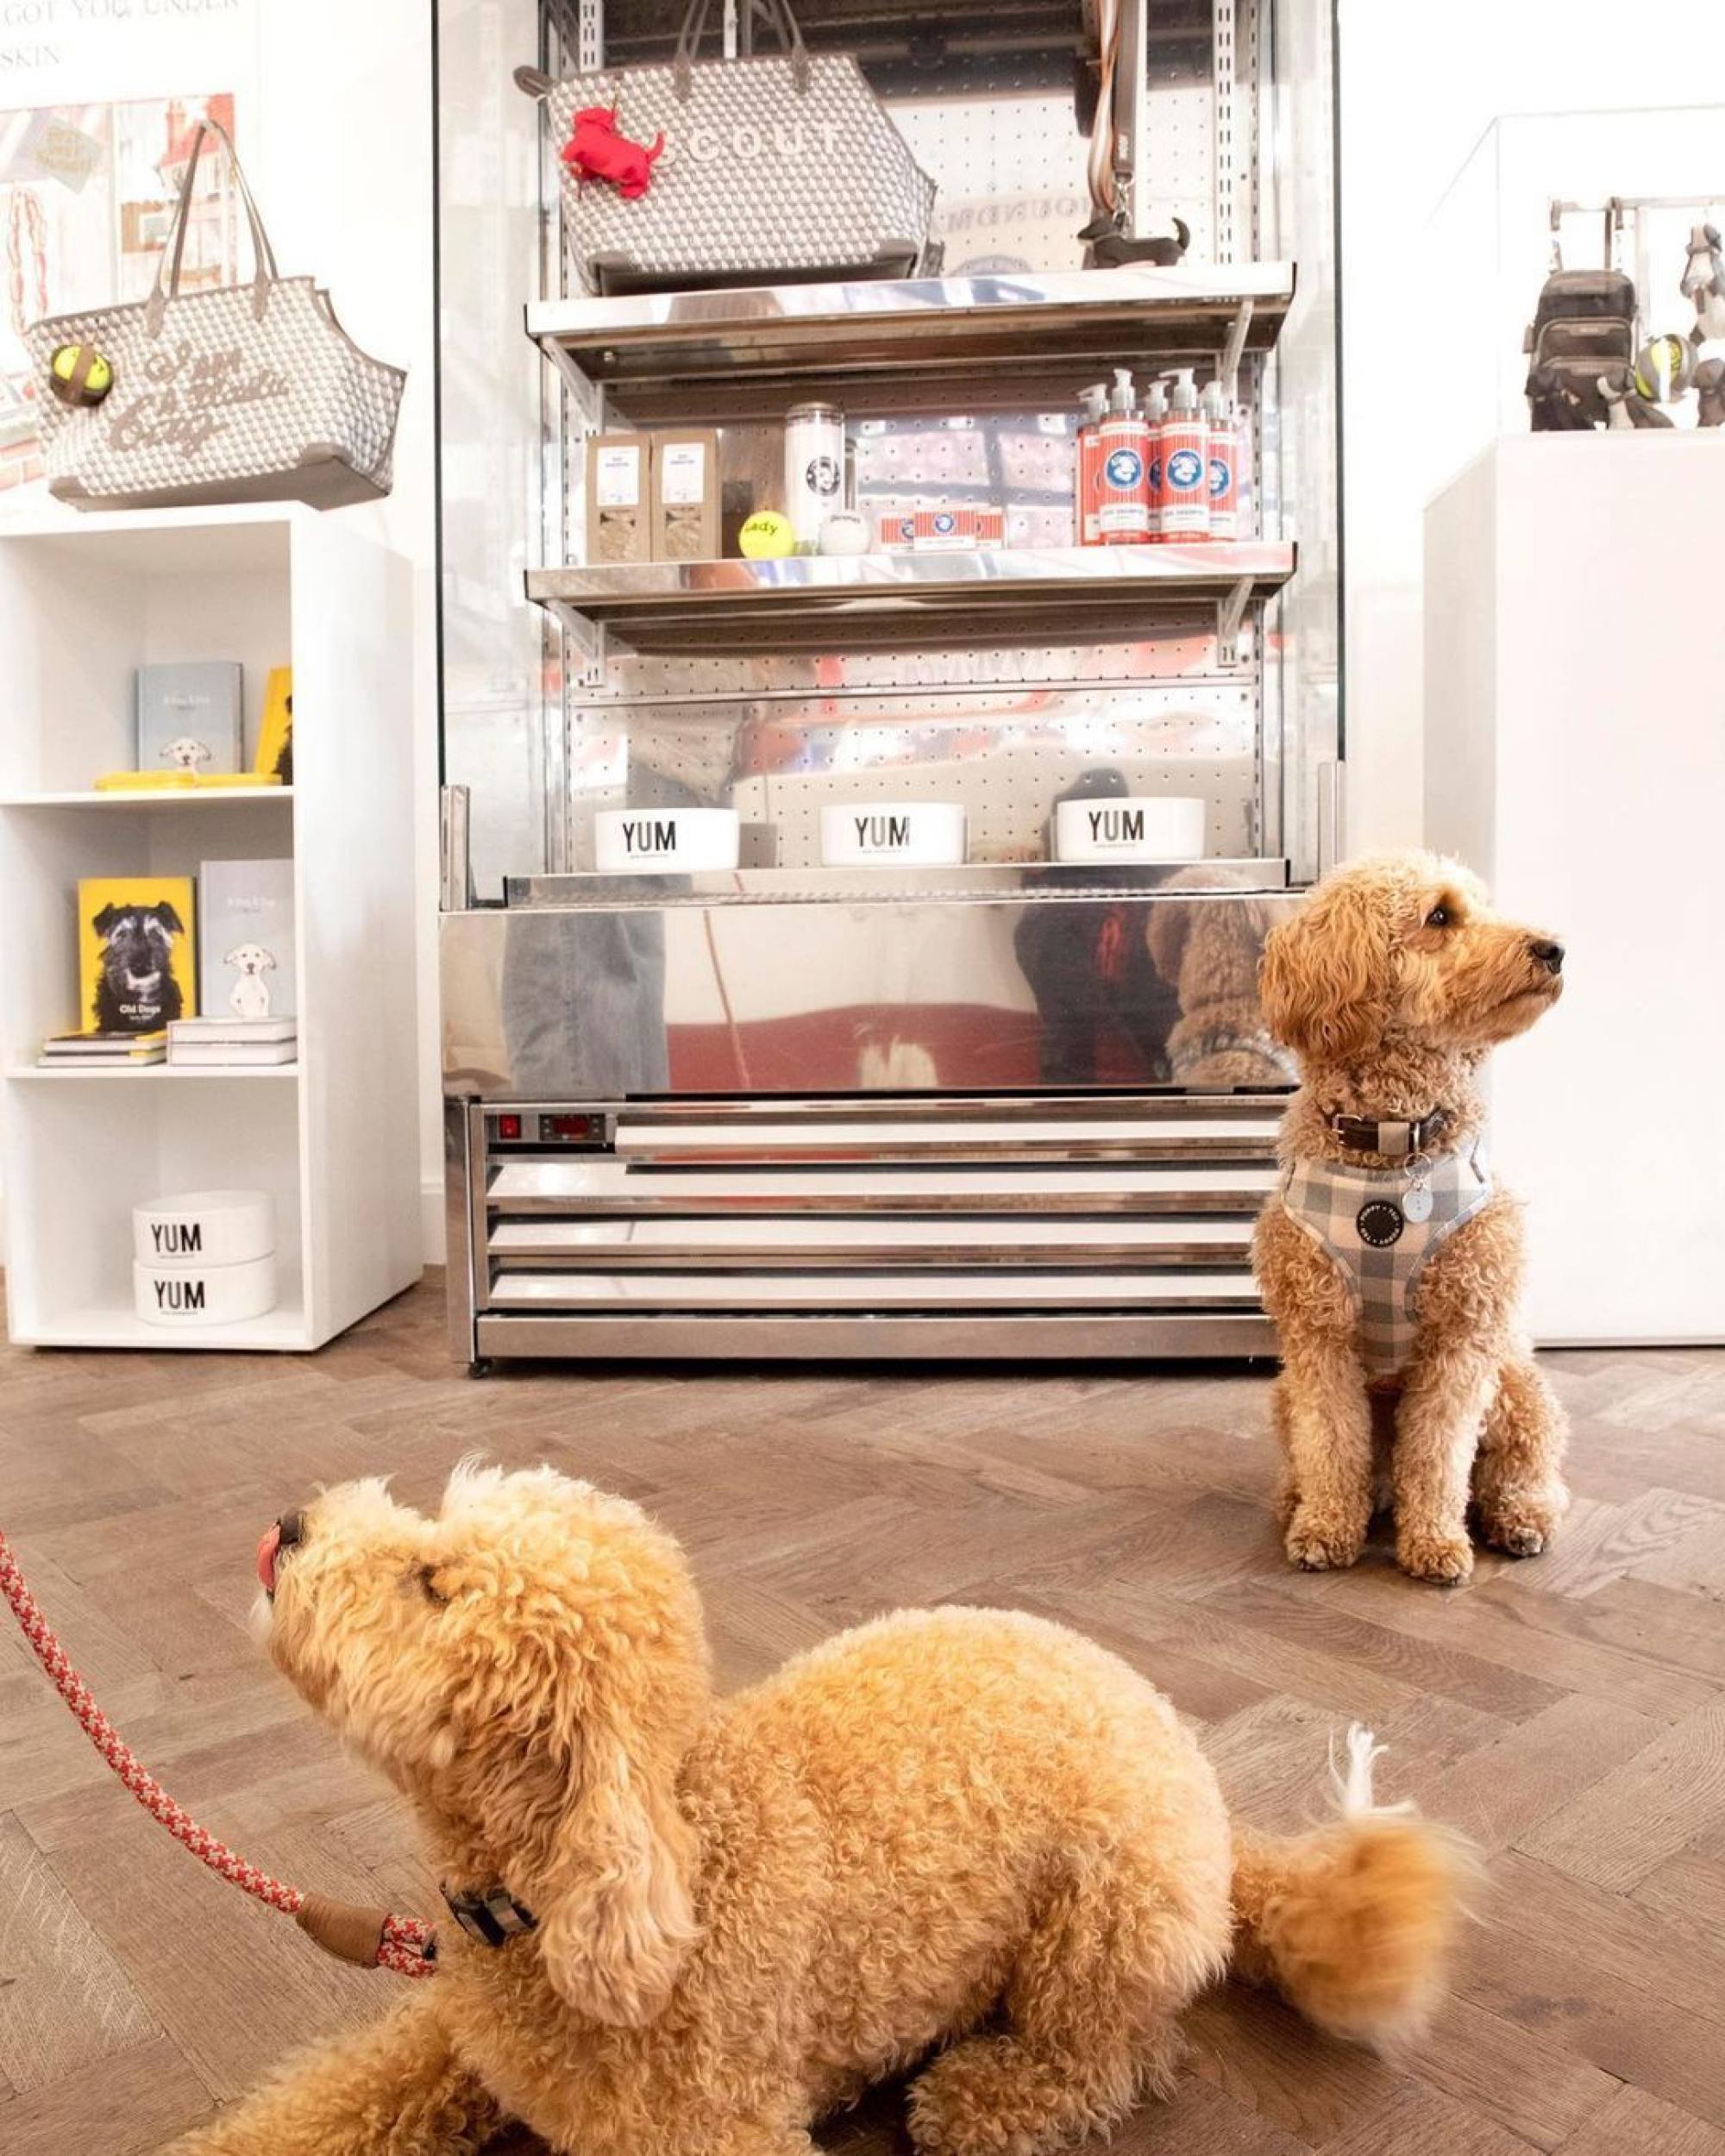 Luxury Brands Prada, Versace Are Getting Into the Pet-Care Market